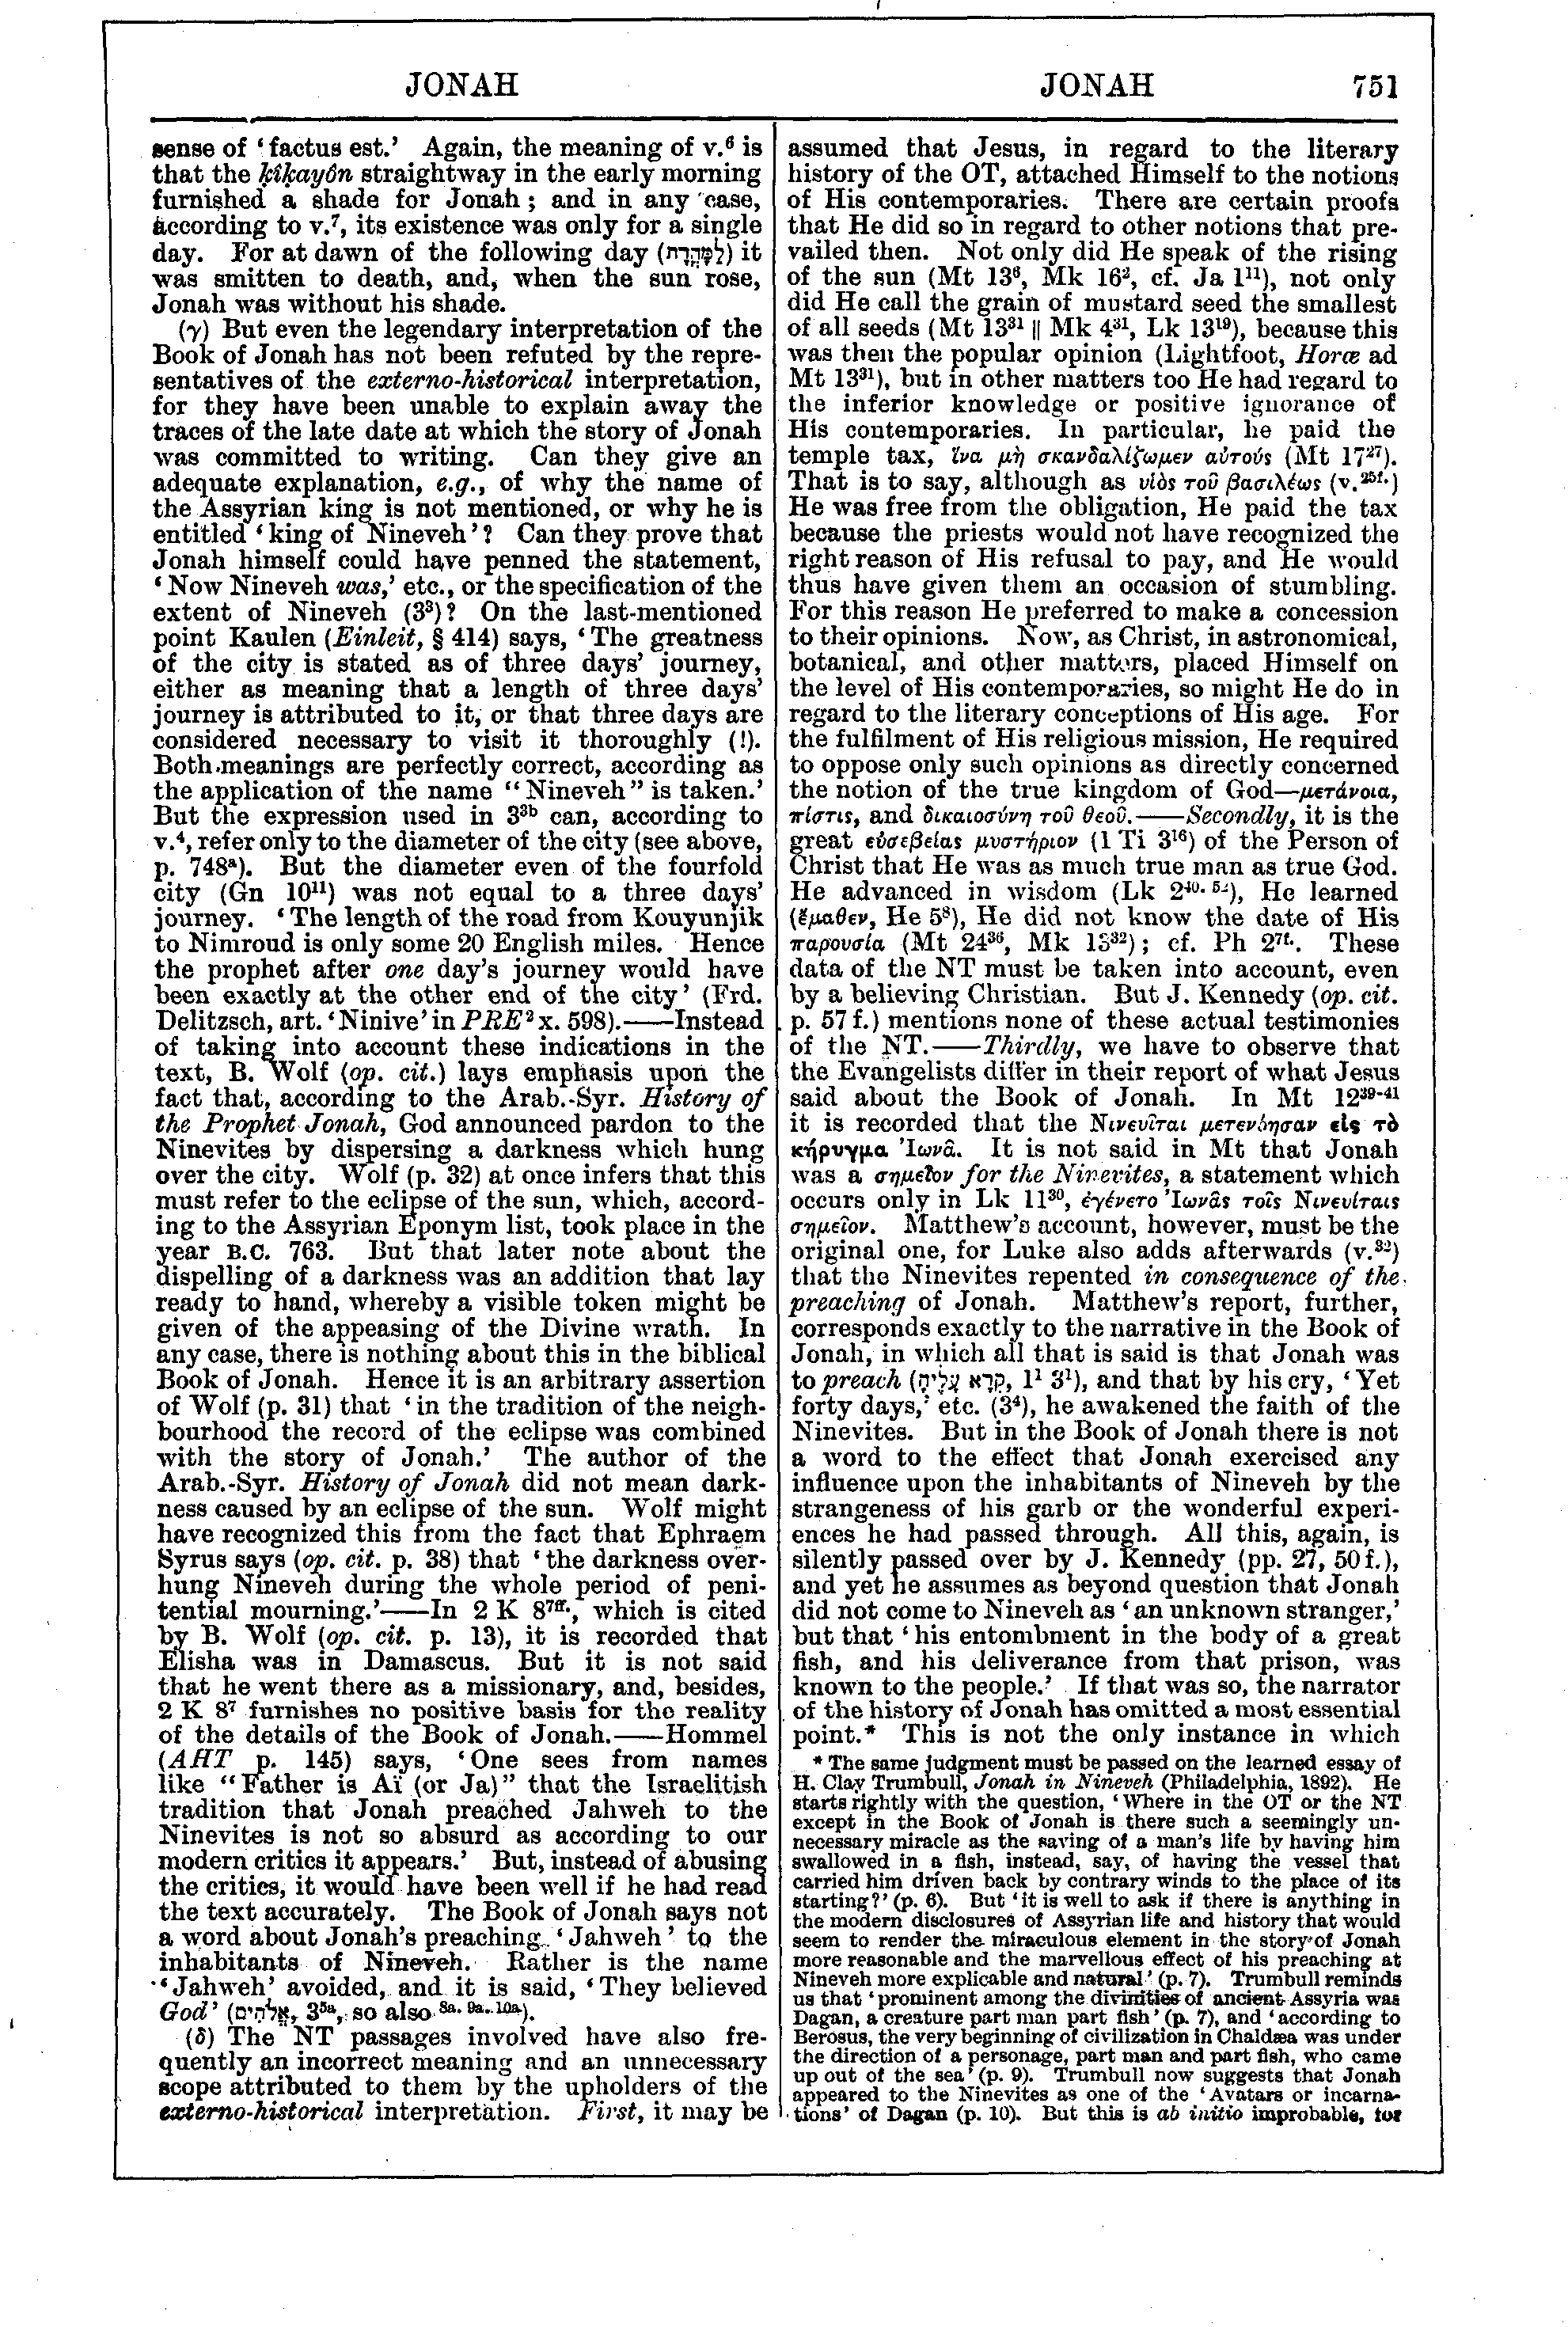 Image of page 751